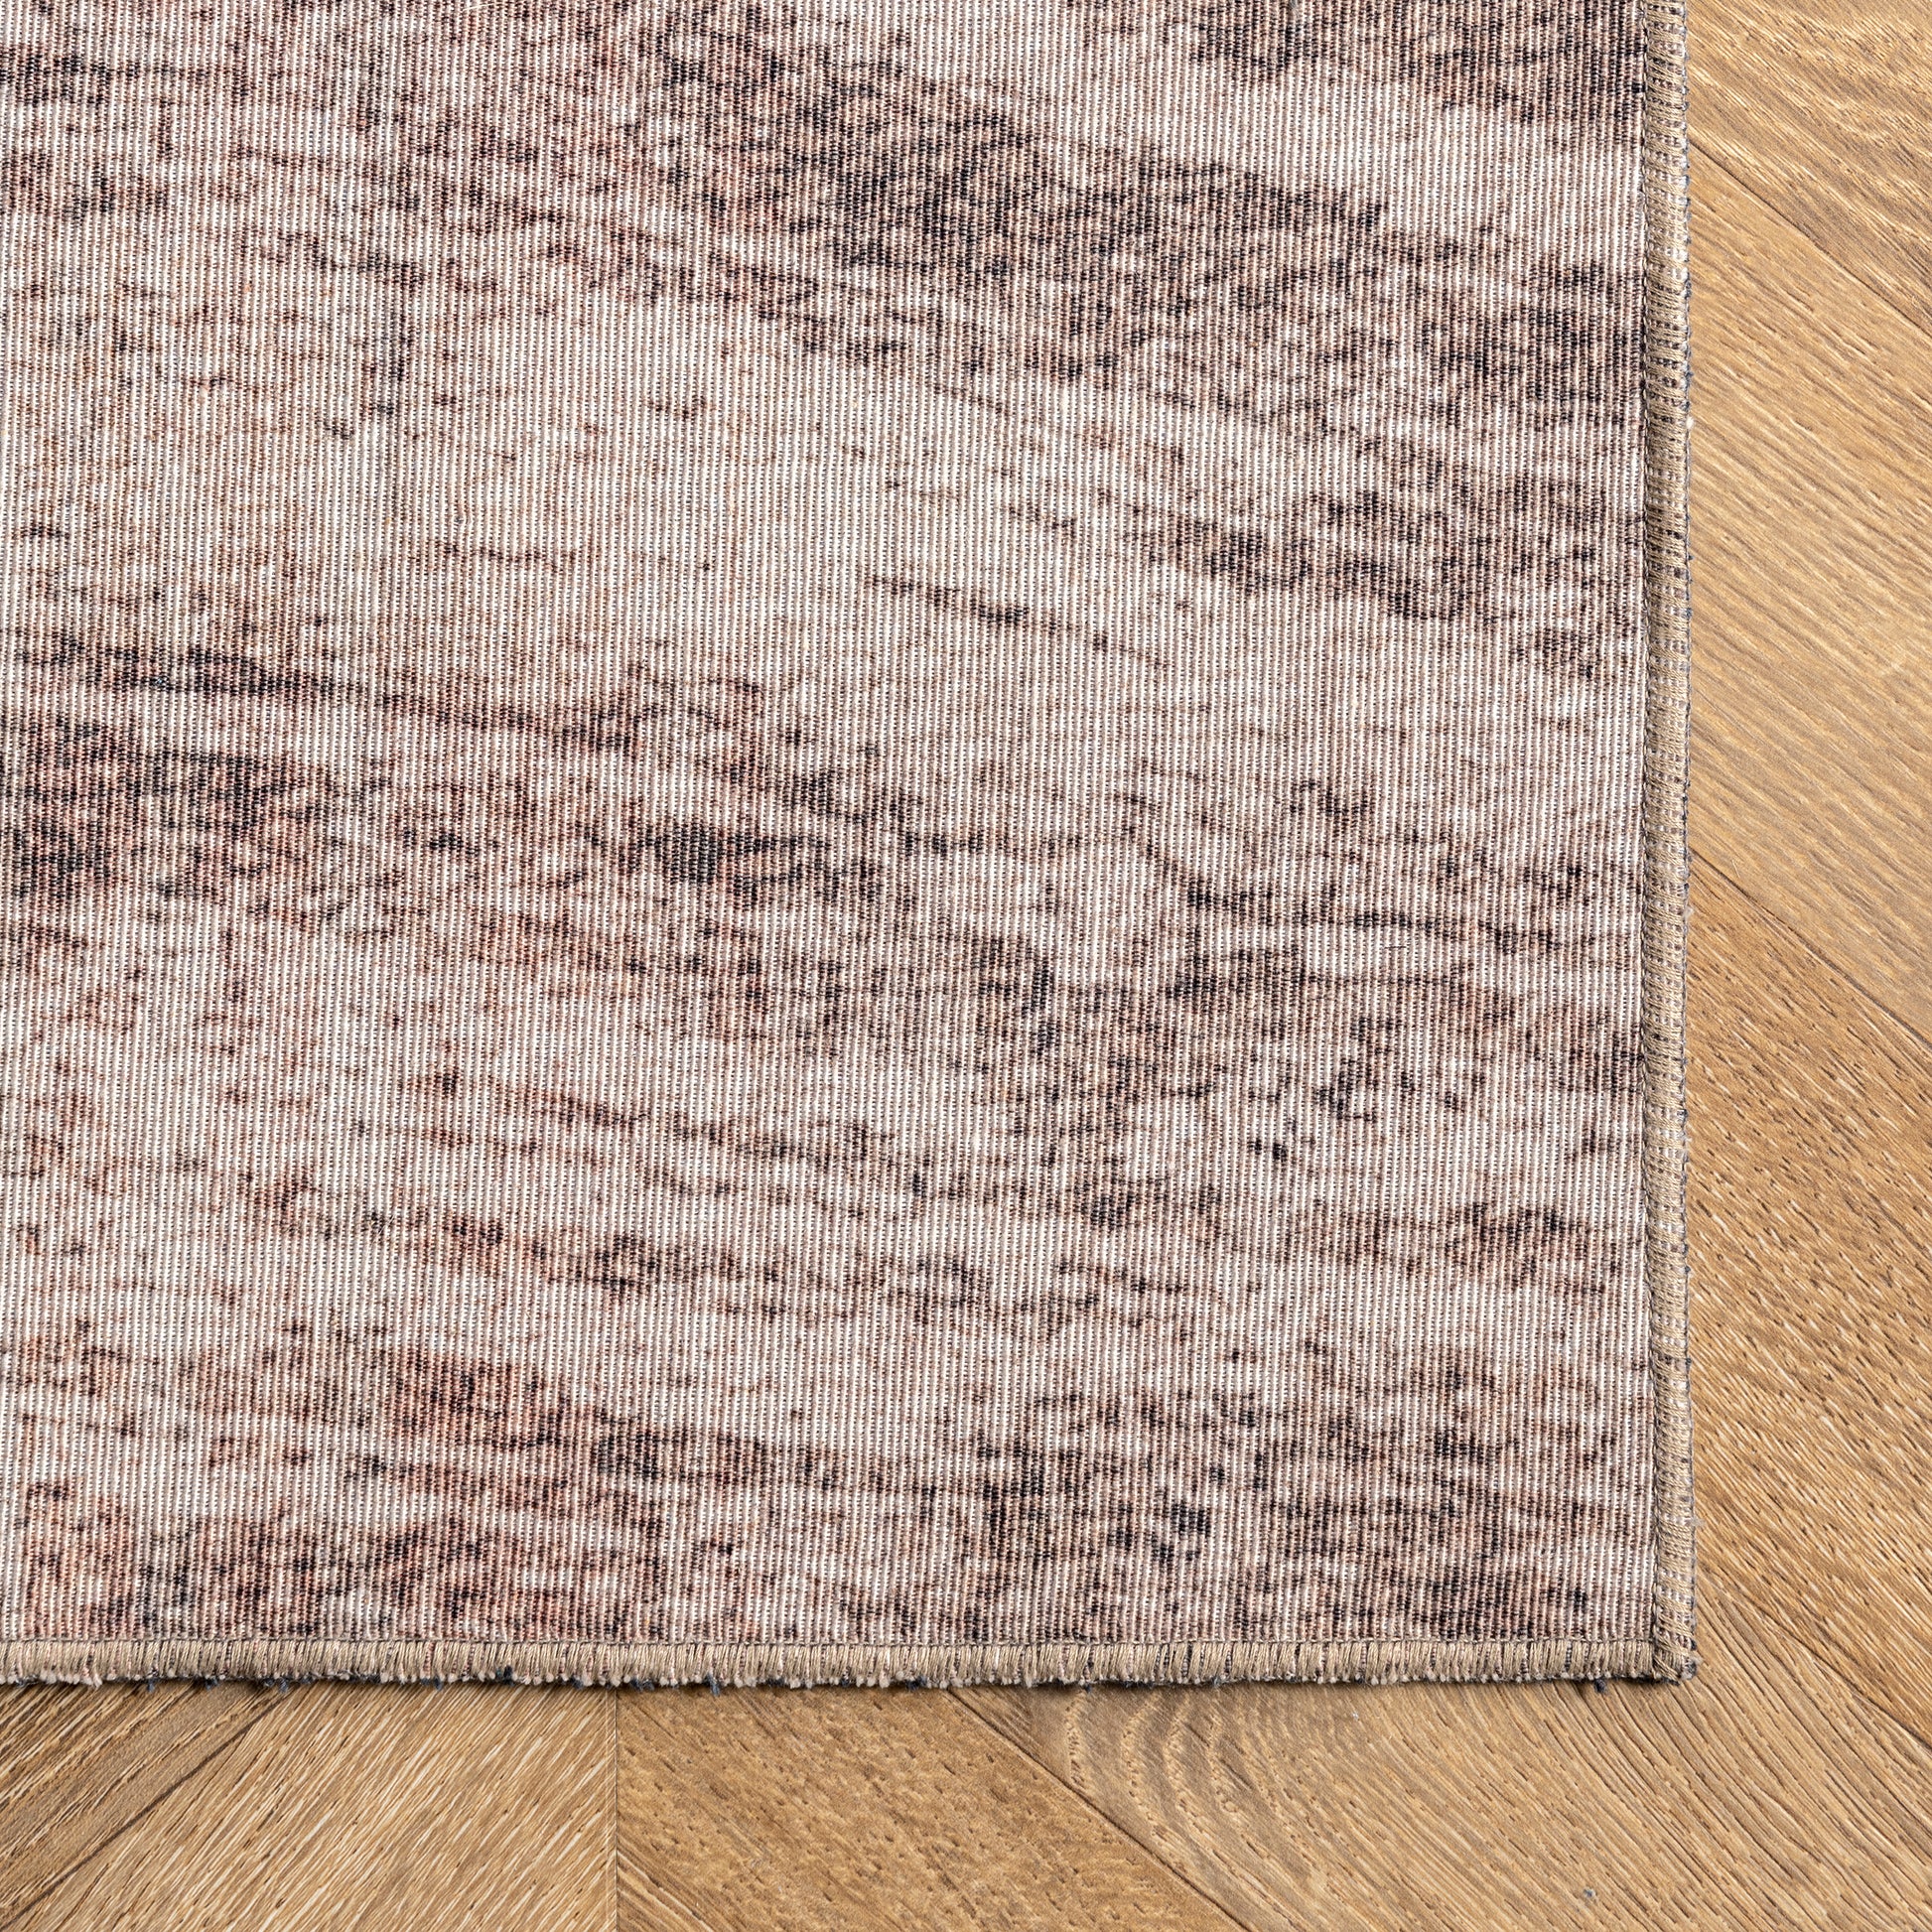 Nuloom Charmaine Fading Marble Nch2815A Beige Area Rug